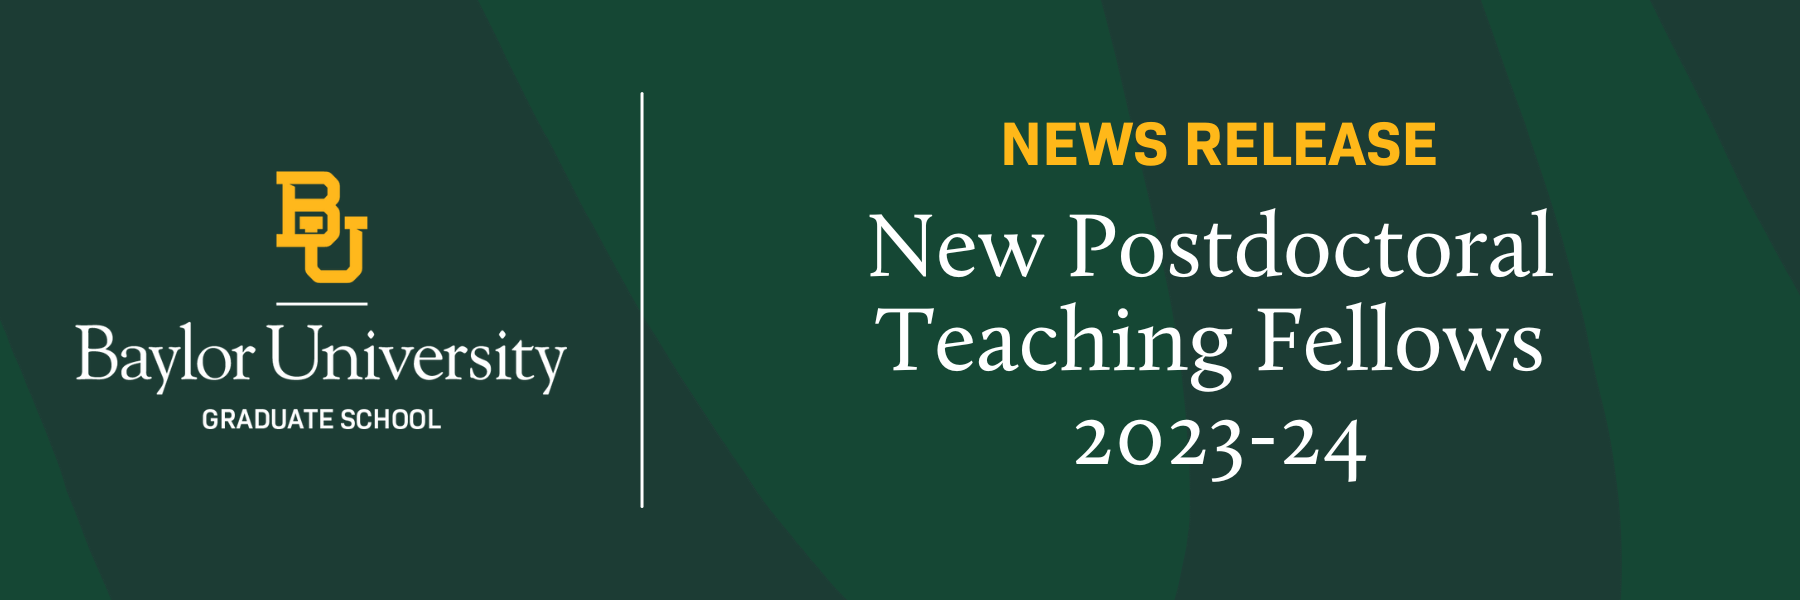 News Release about Teaching Fellows 2023-24 Updated